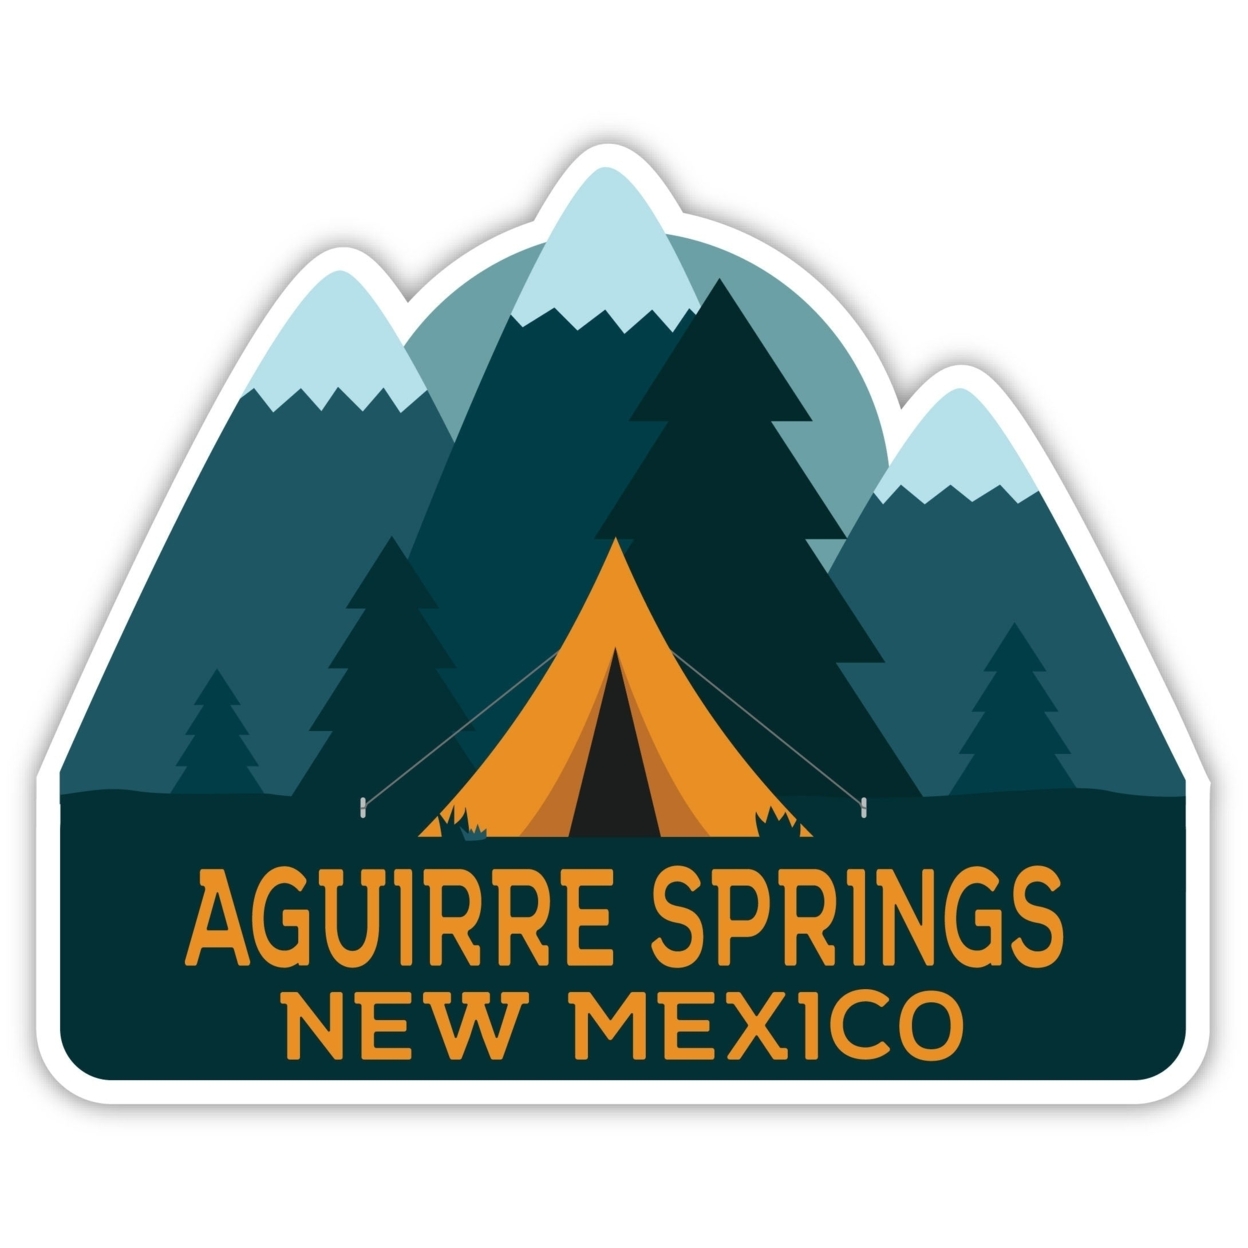 Aguirre Springs New Mexico Souvenir Decorative Stickers (Choose Theme And Size) - Single Unit, 10-Inch, Tent